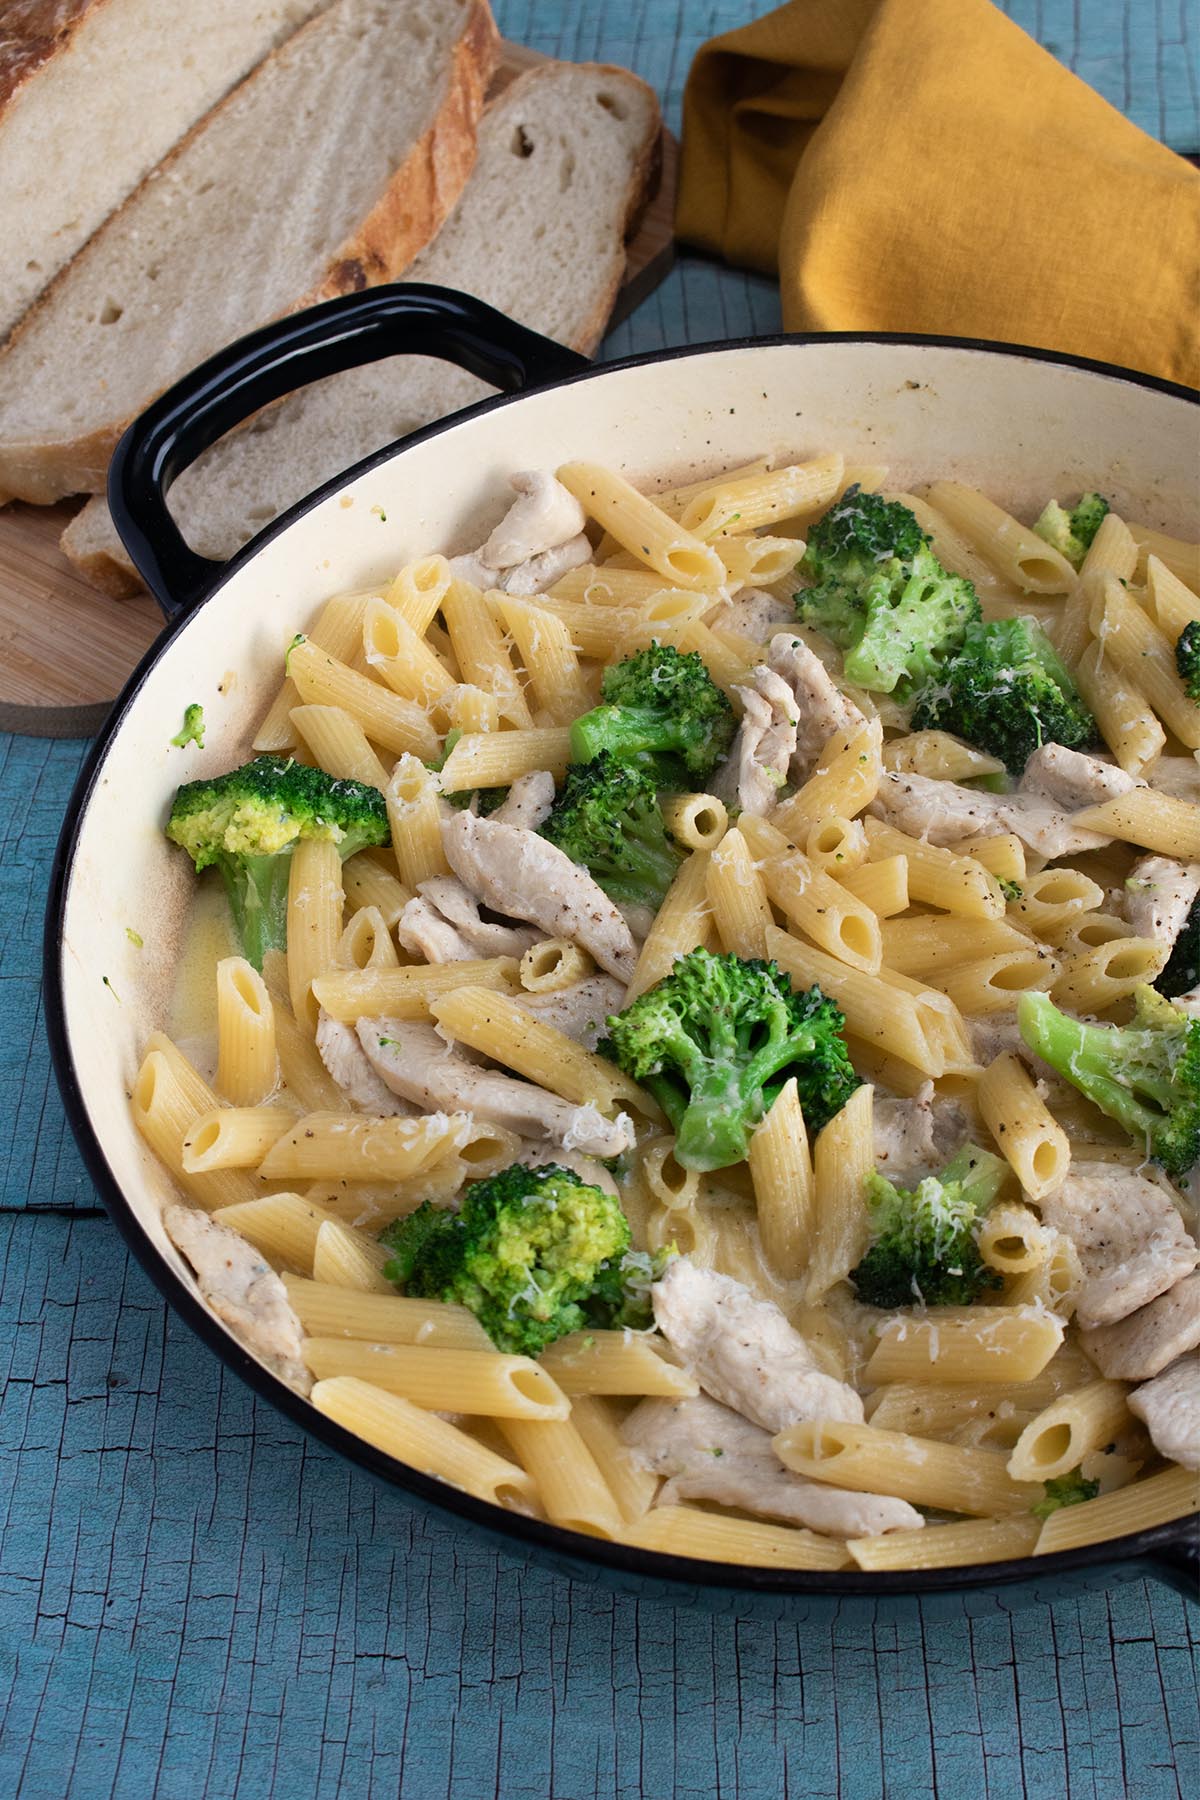 Chicken and broccoli pasta in large round casserole with bread and yellow napkin in background